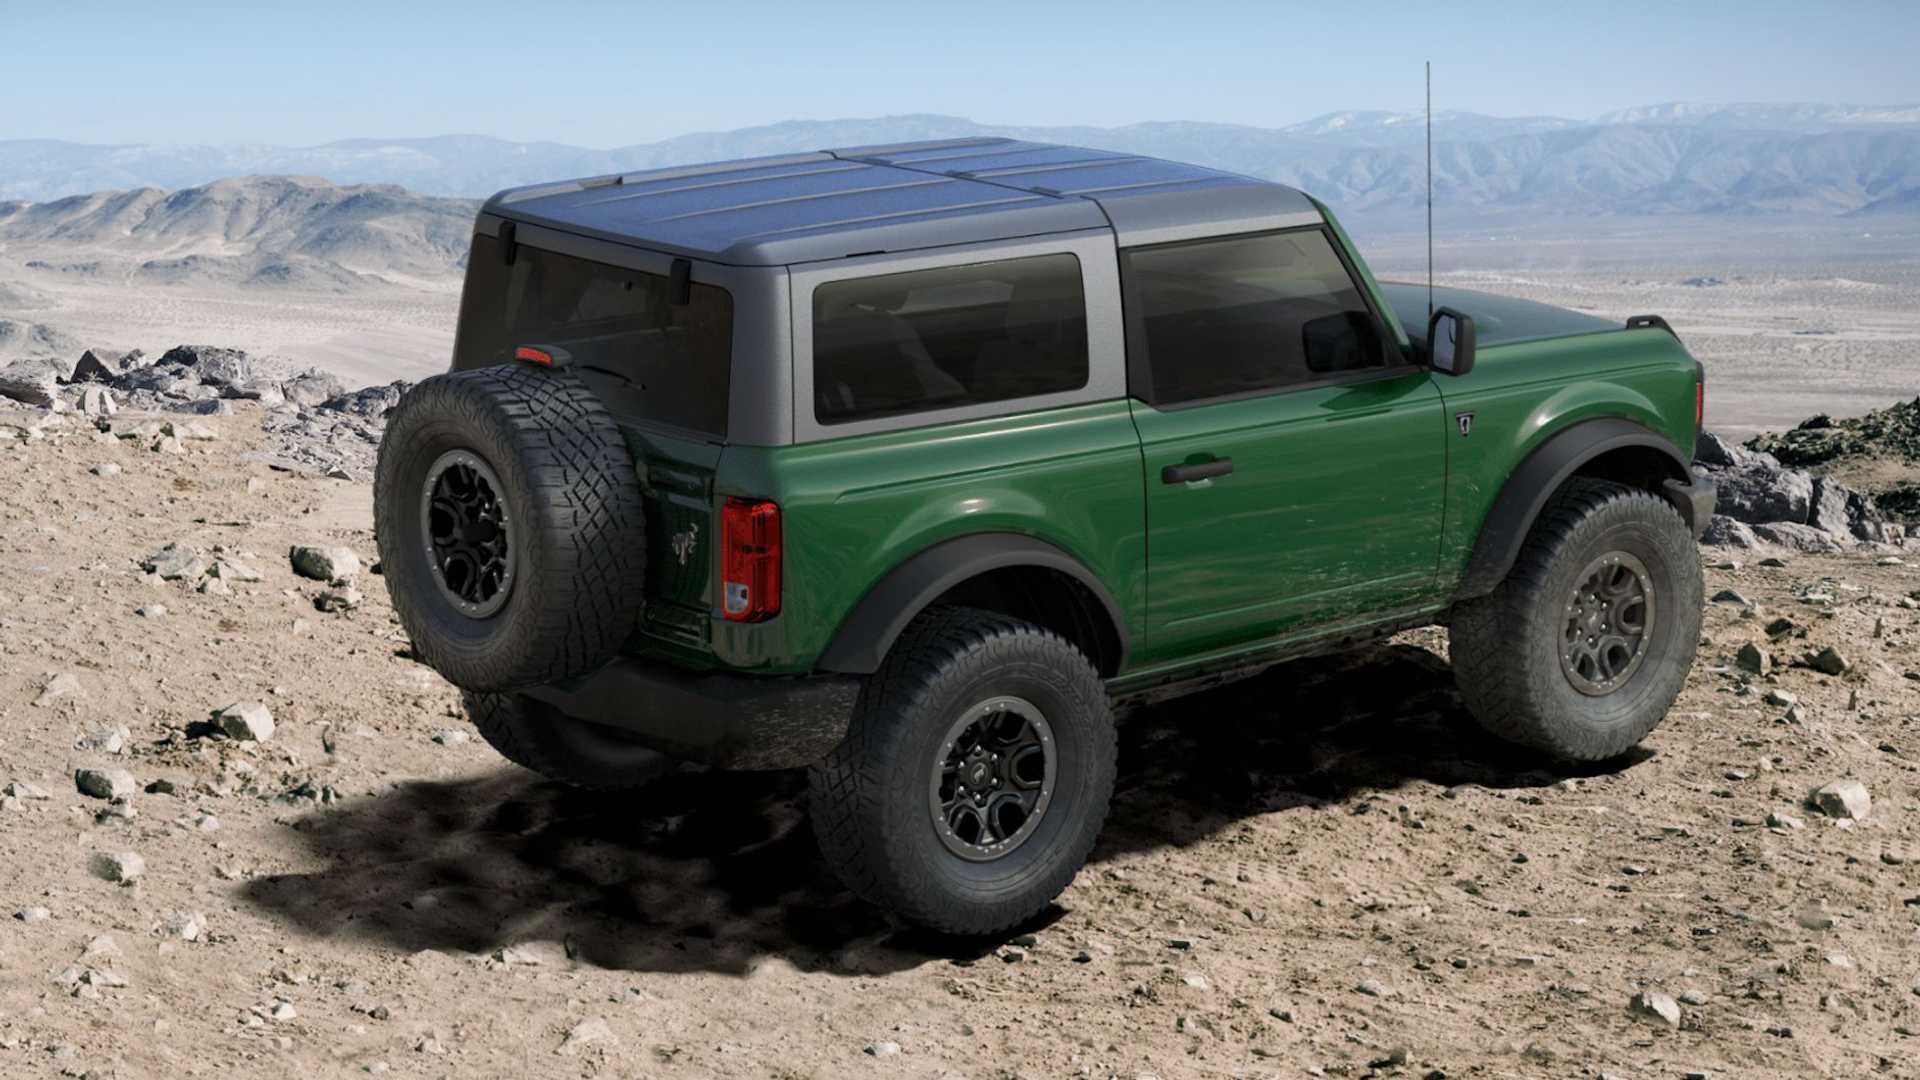 2022 Ford Bronco Prices Increase Again ...